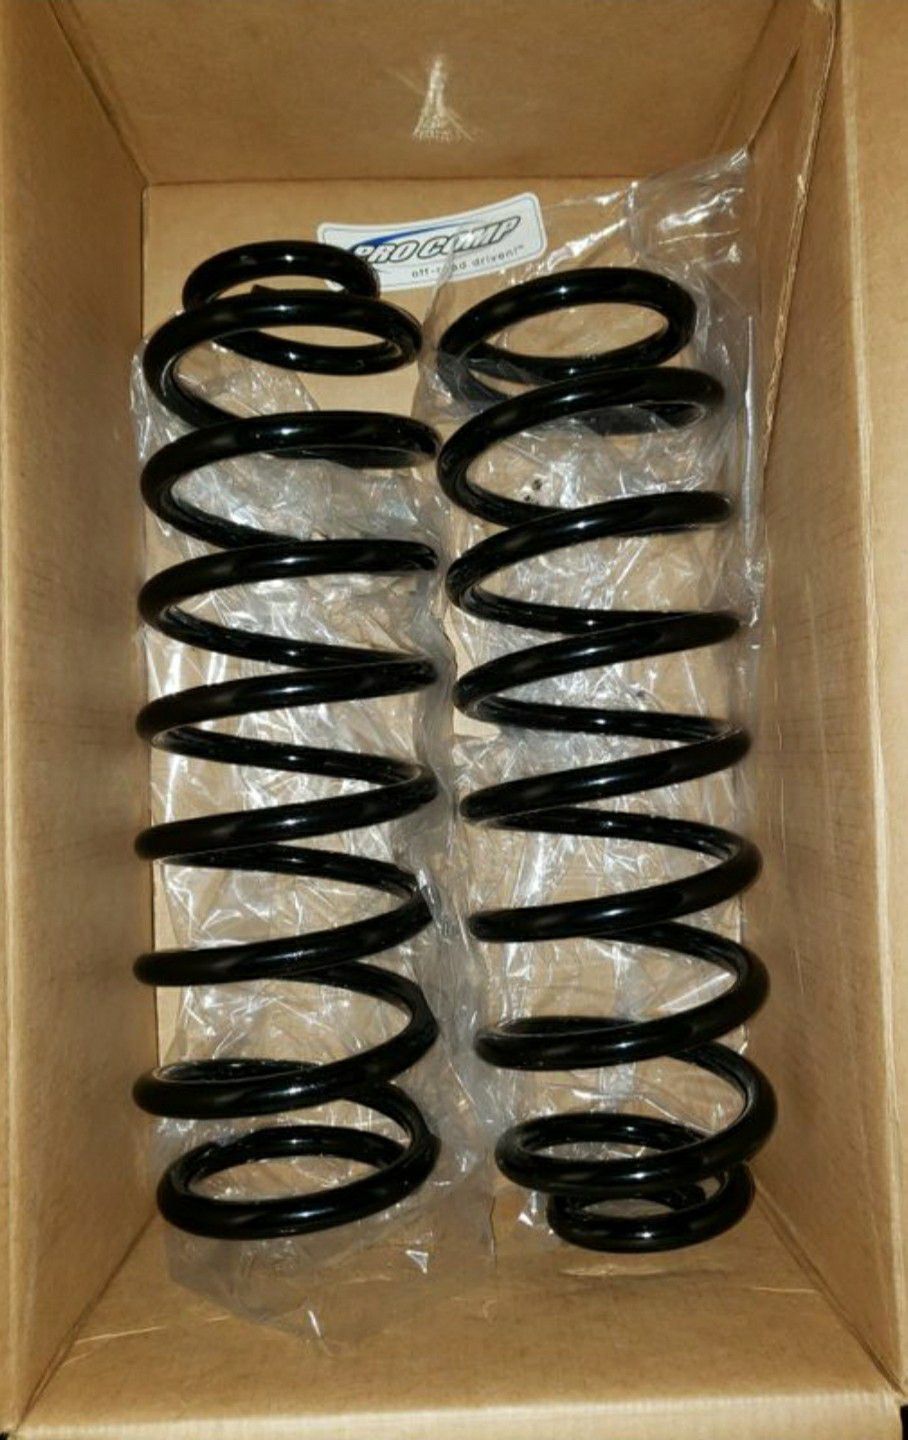 Jeep JK Pro Comp 6 Inch Lift Coil Springs, Rear, 5 Inch - 6.5 Inch Lift Range